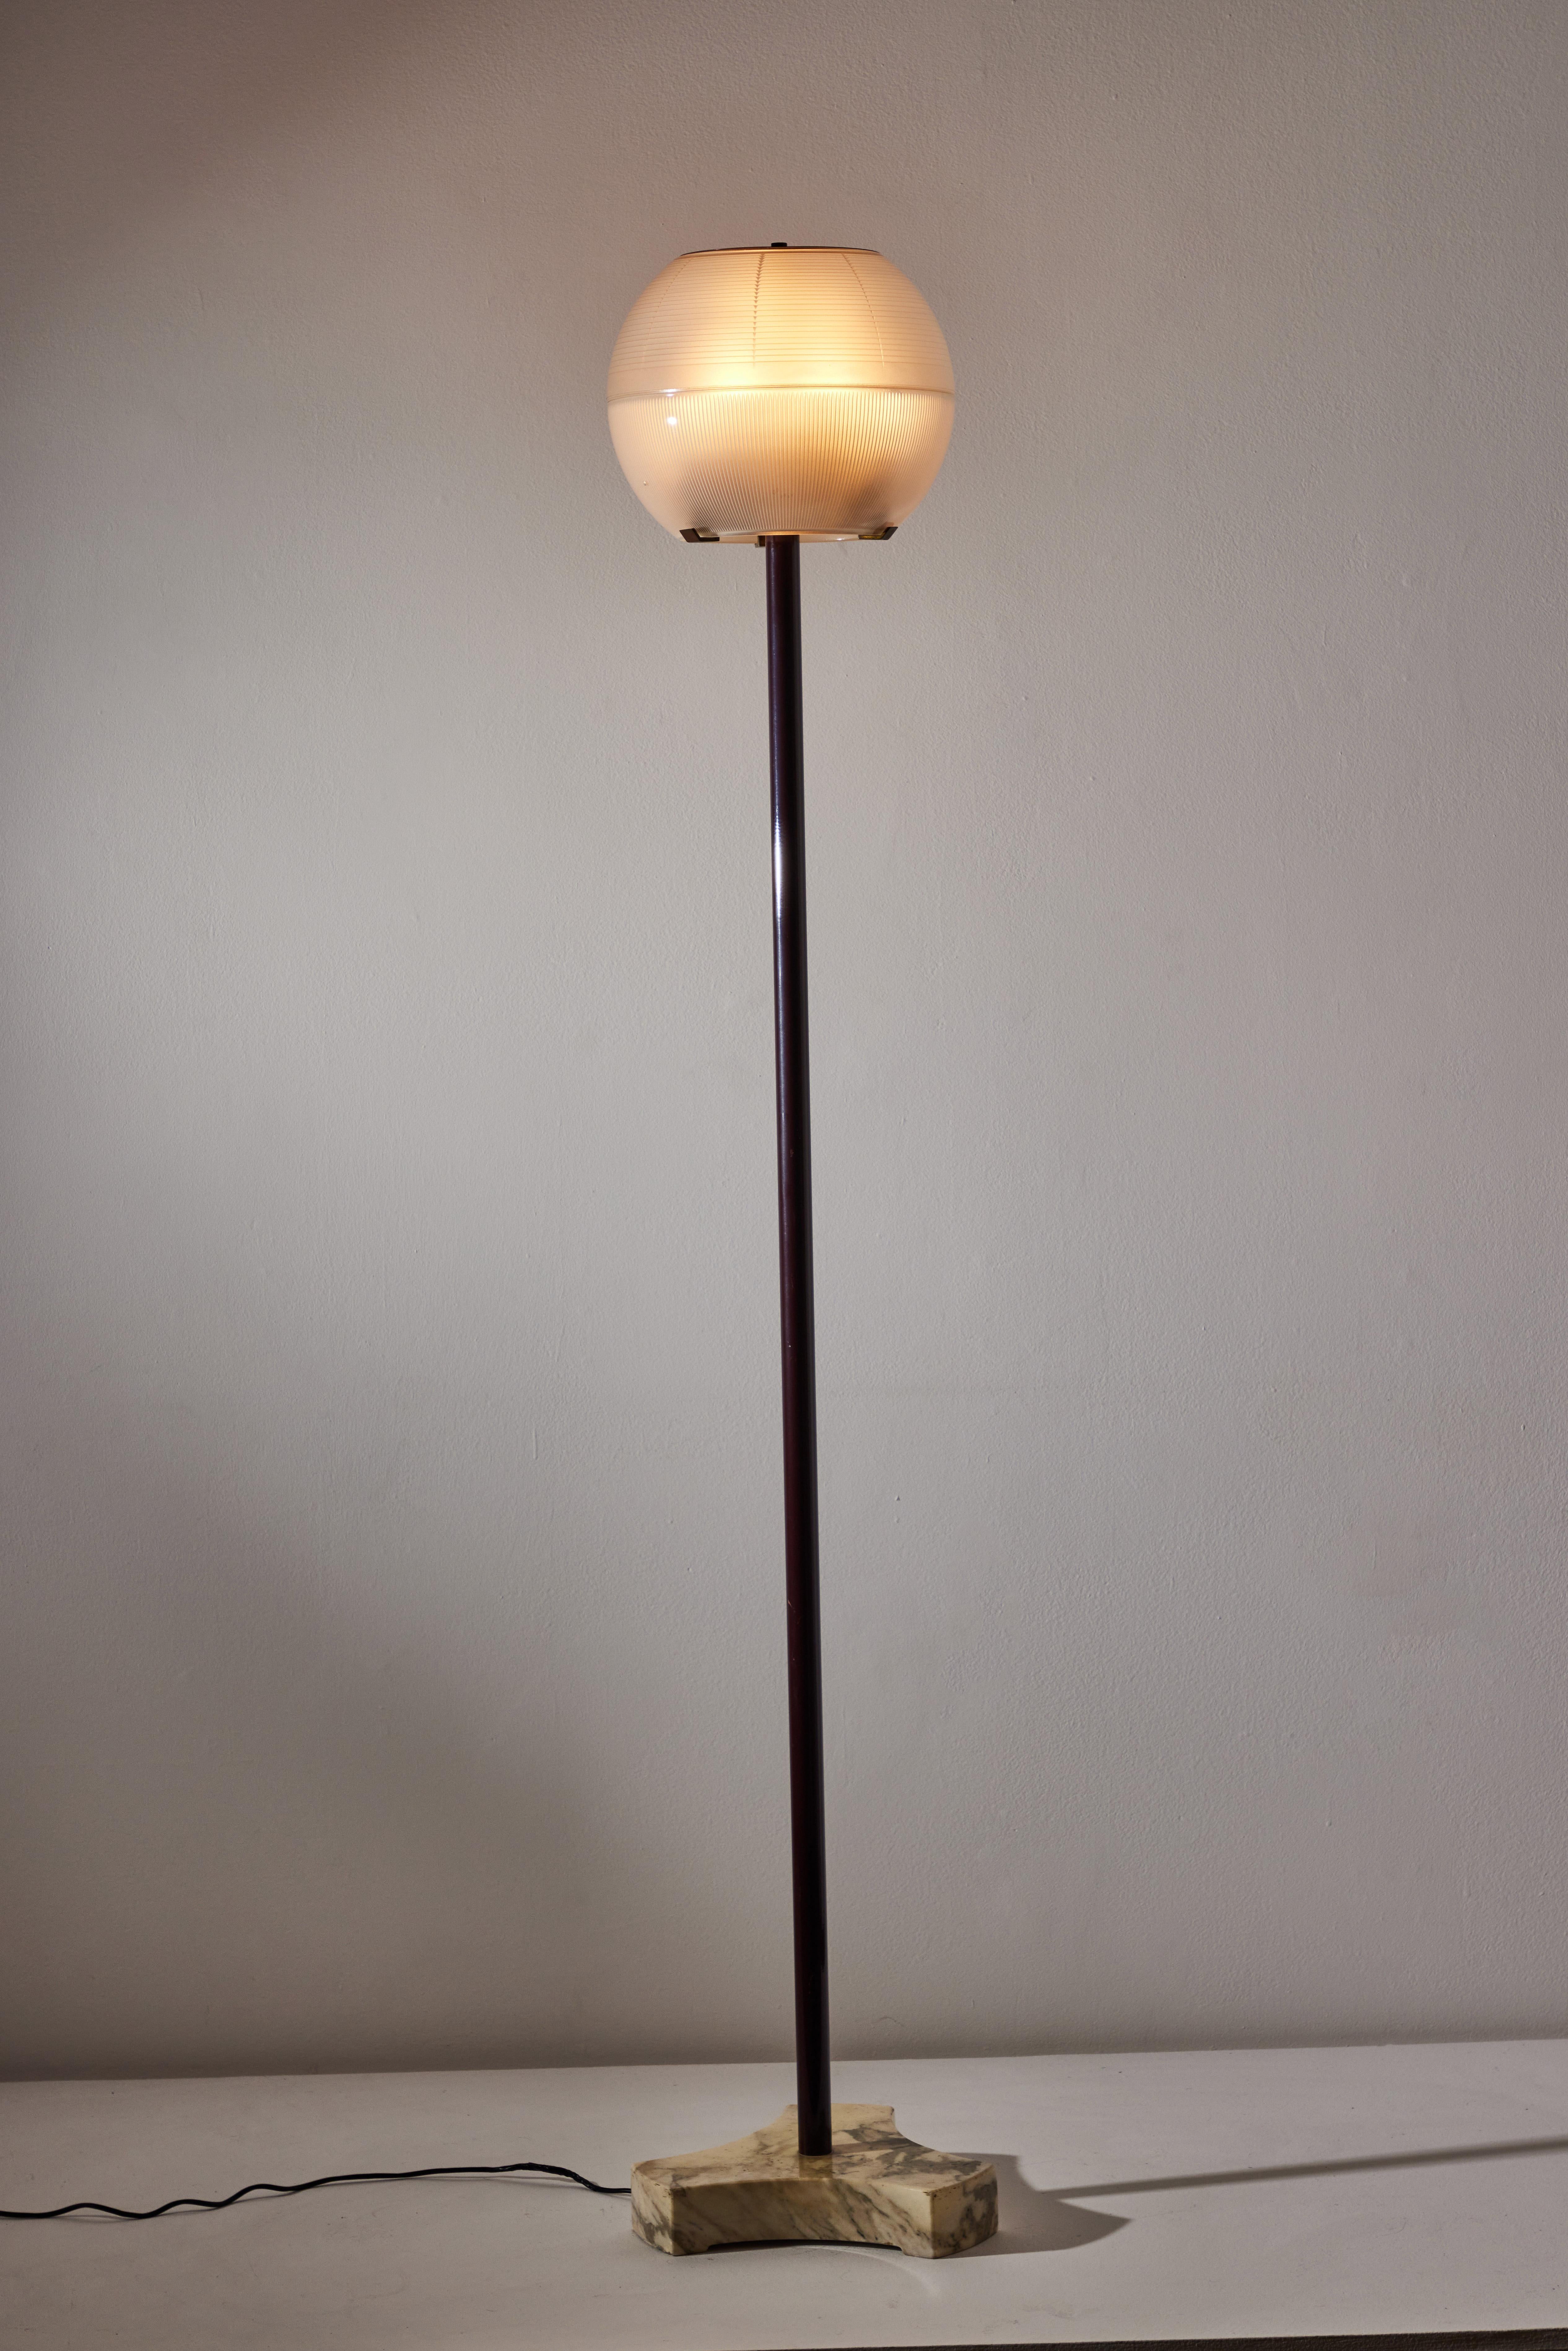 Model LTE 8 floor lamp by Ignazio Gardella for Azucena. Designed and manufactured in Italy, circa 1950's. Holophane glass diffuser, brass, marble base. EU plug. Lightbulbs not included. Suggested lamping: 3 Qty 120V E27 45W frosted